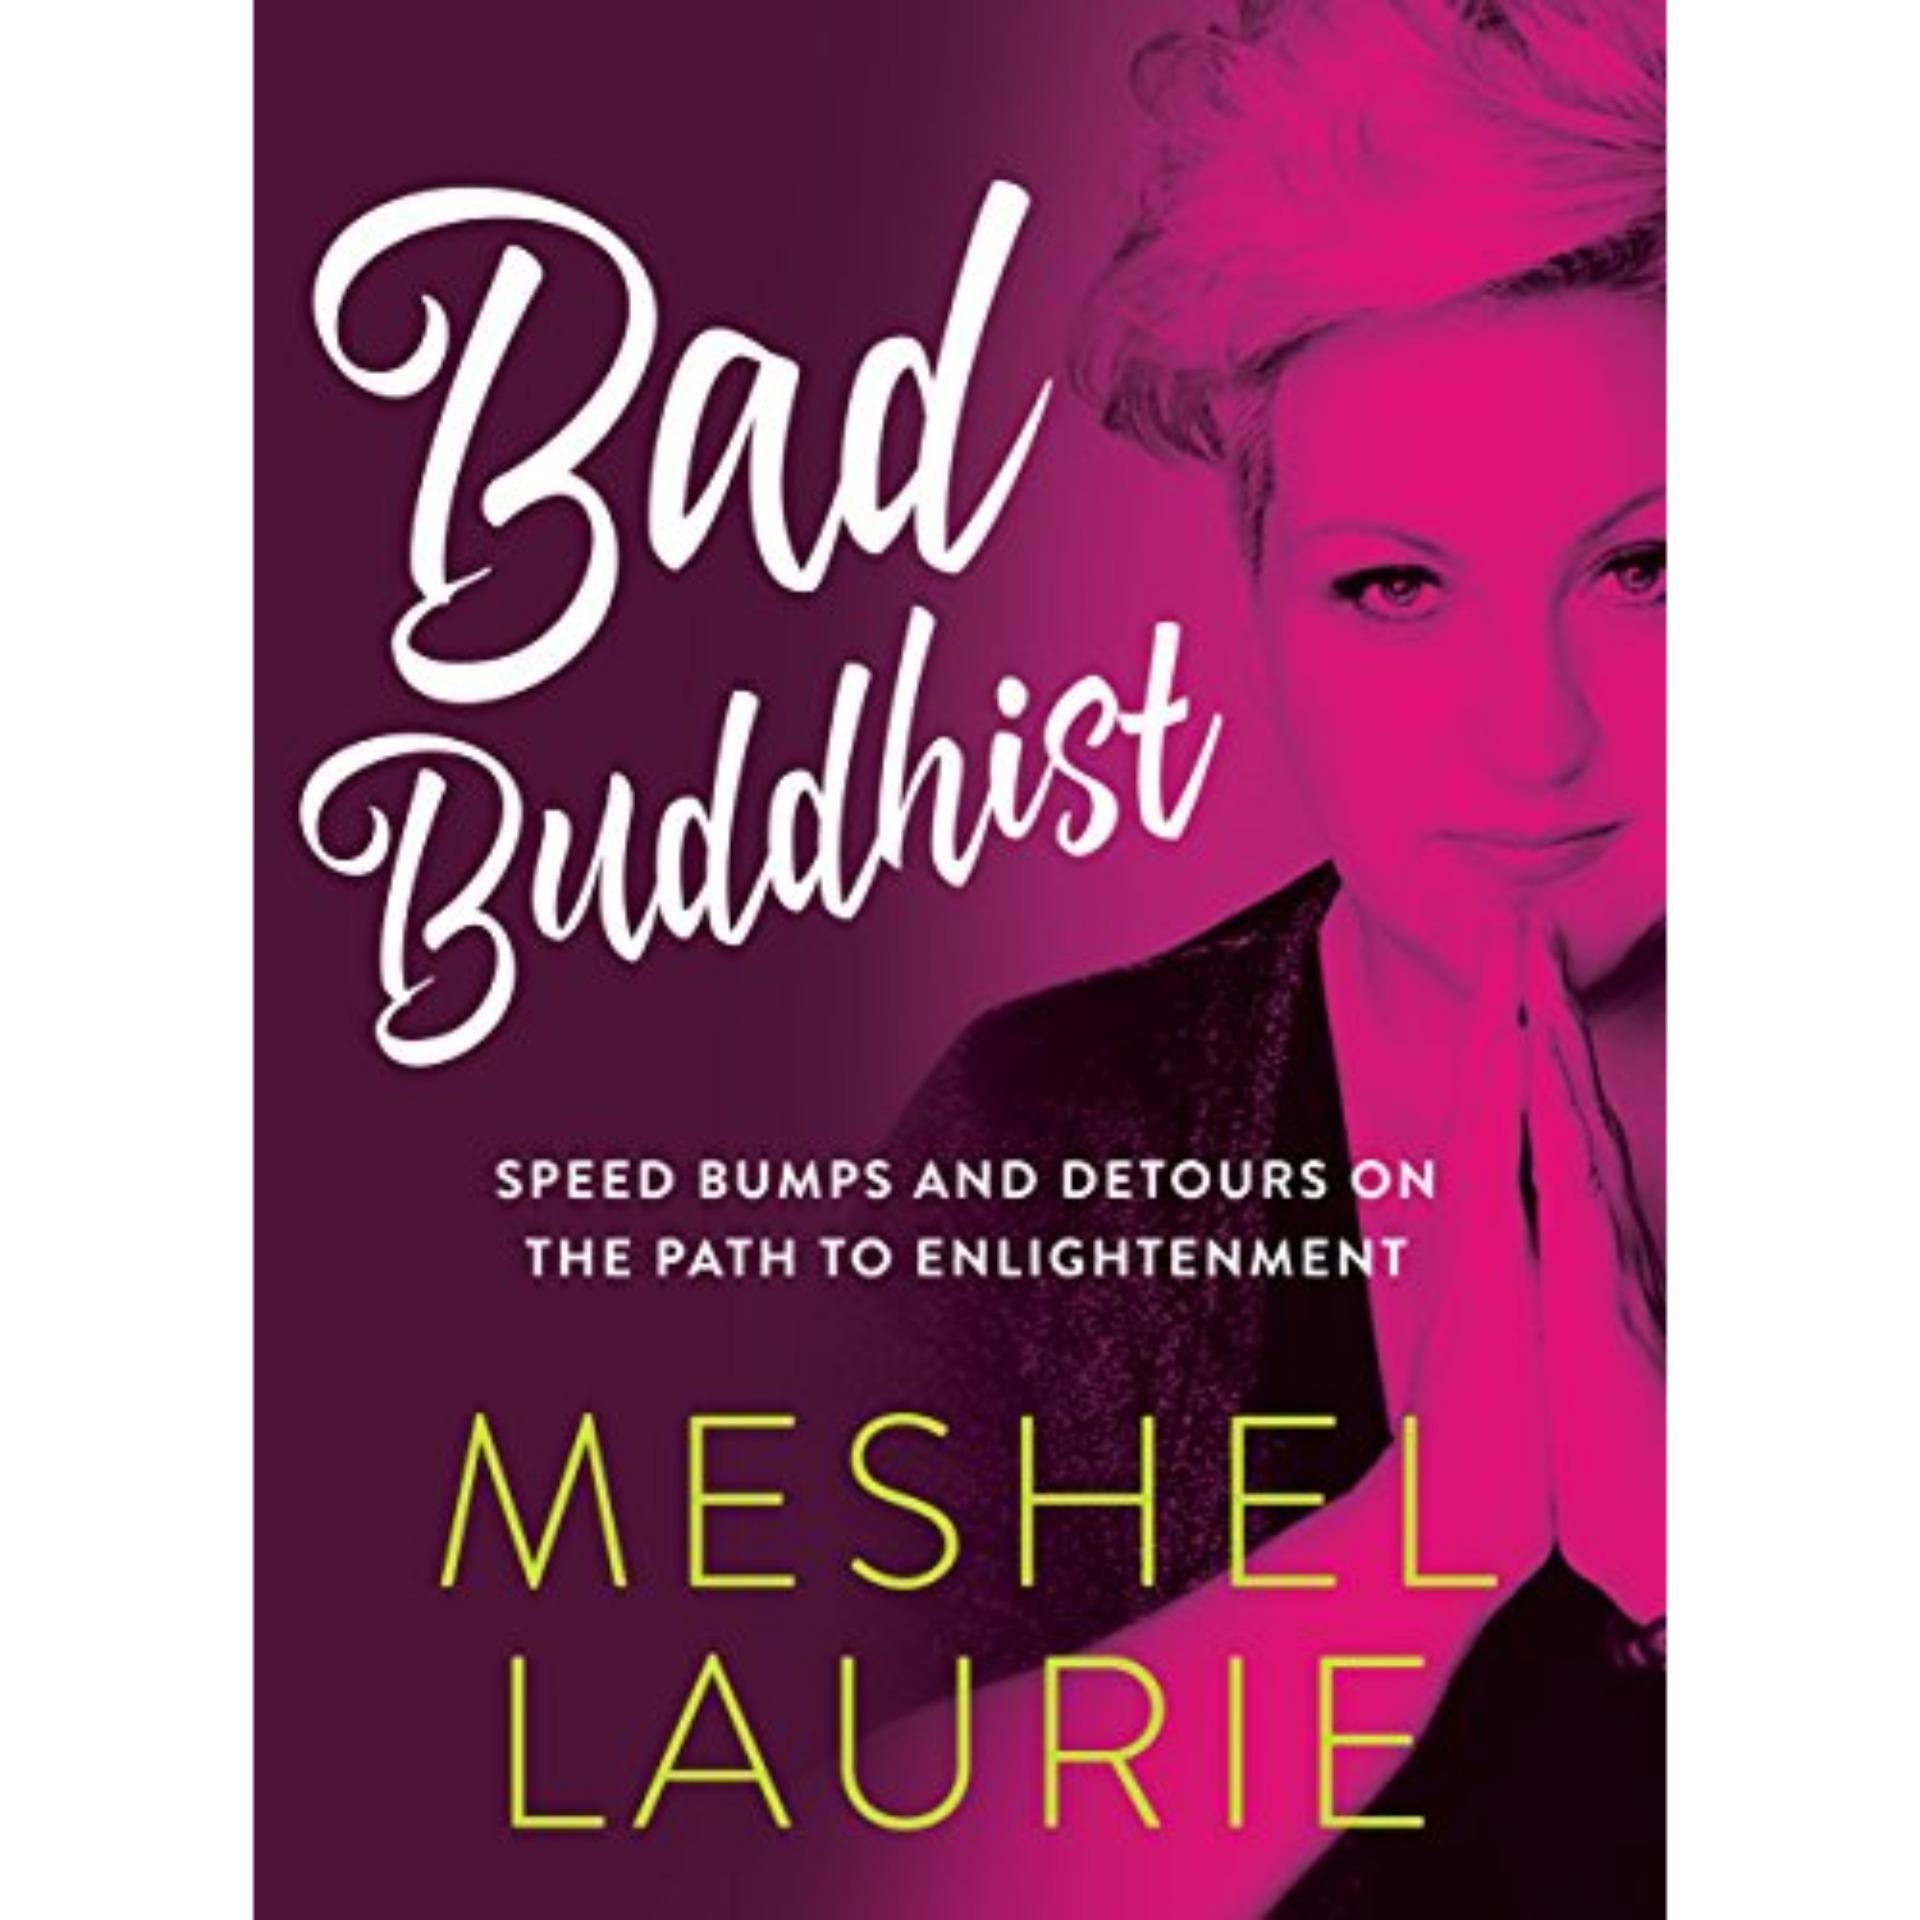 Bad Buddhist by Meshel Laurie (Original) - BOOK A BOOK